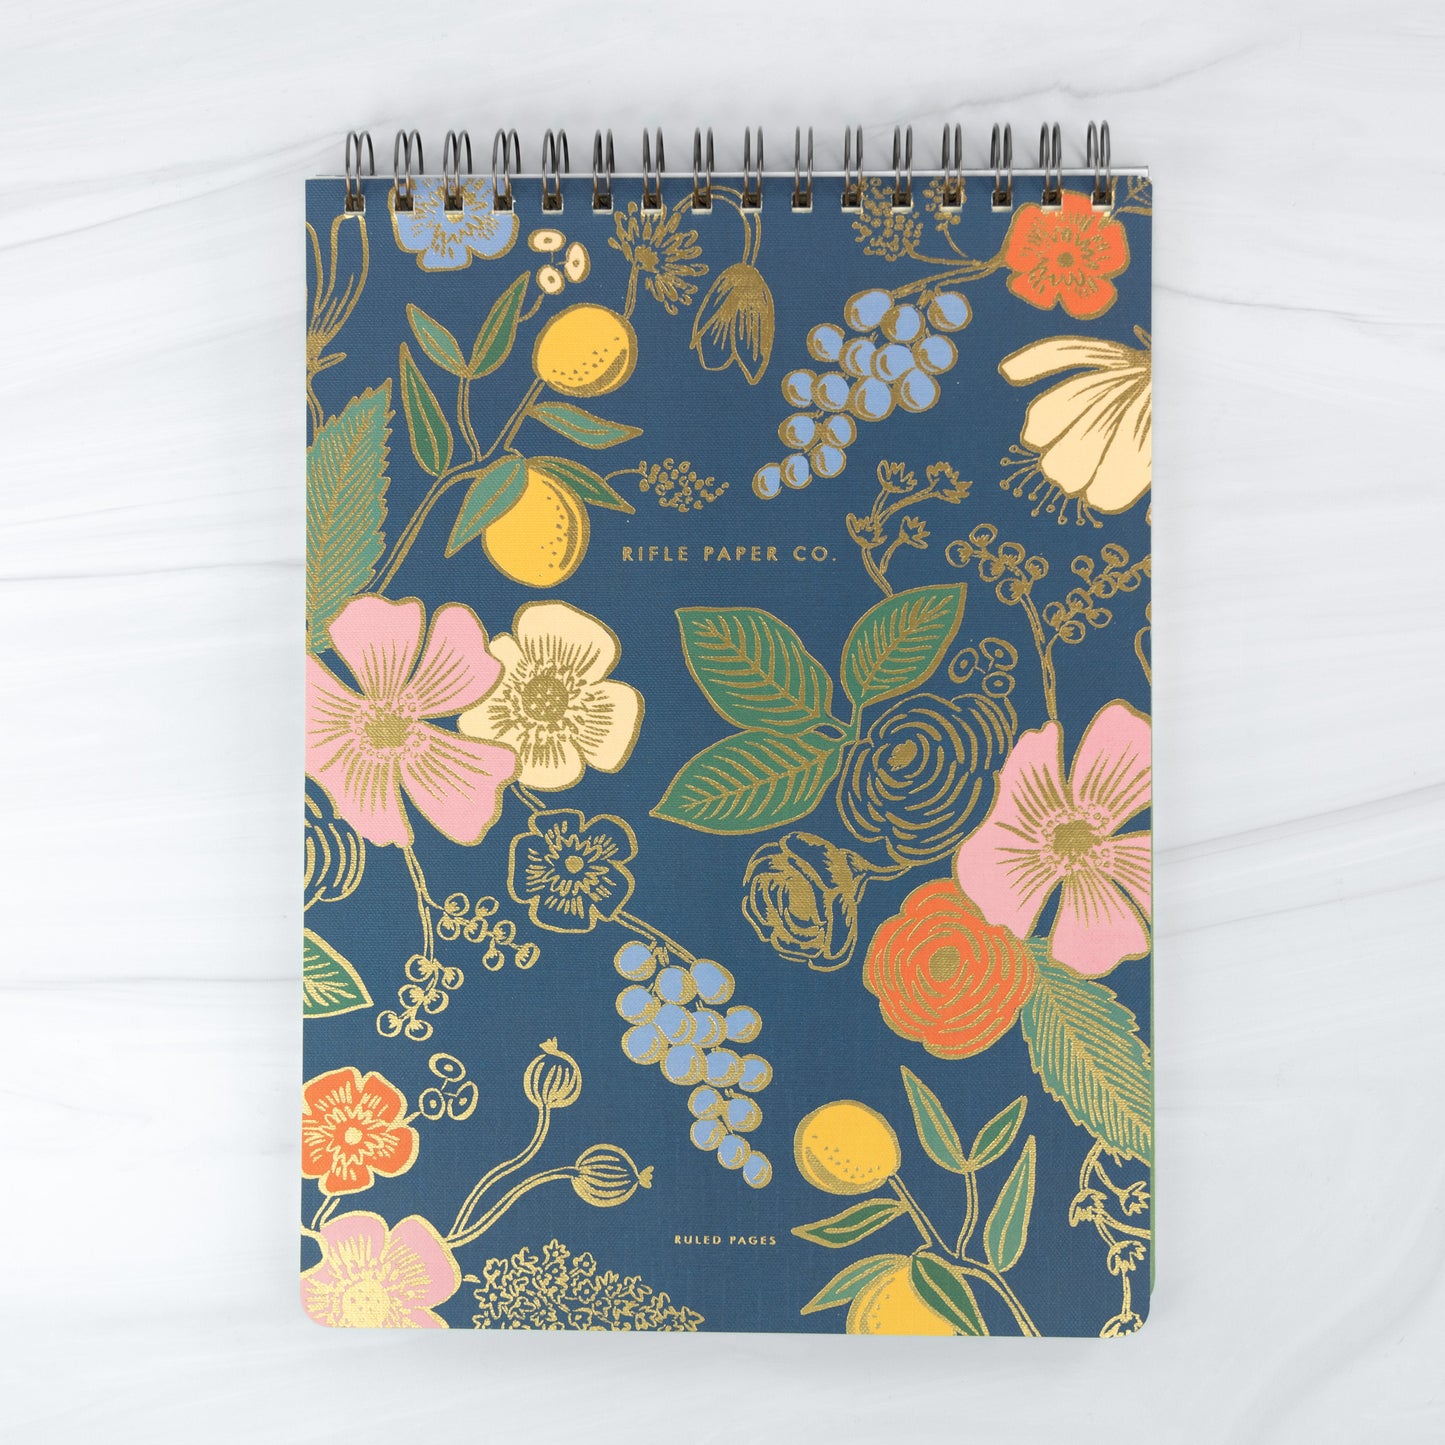 Colete Large Top Spiral Notebook